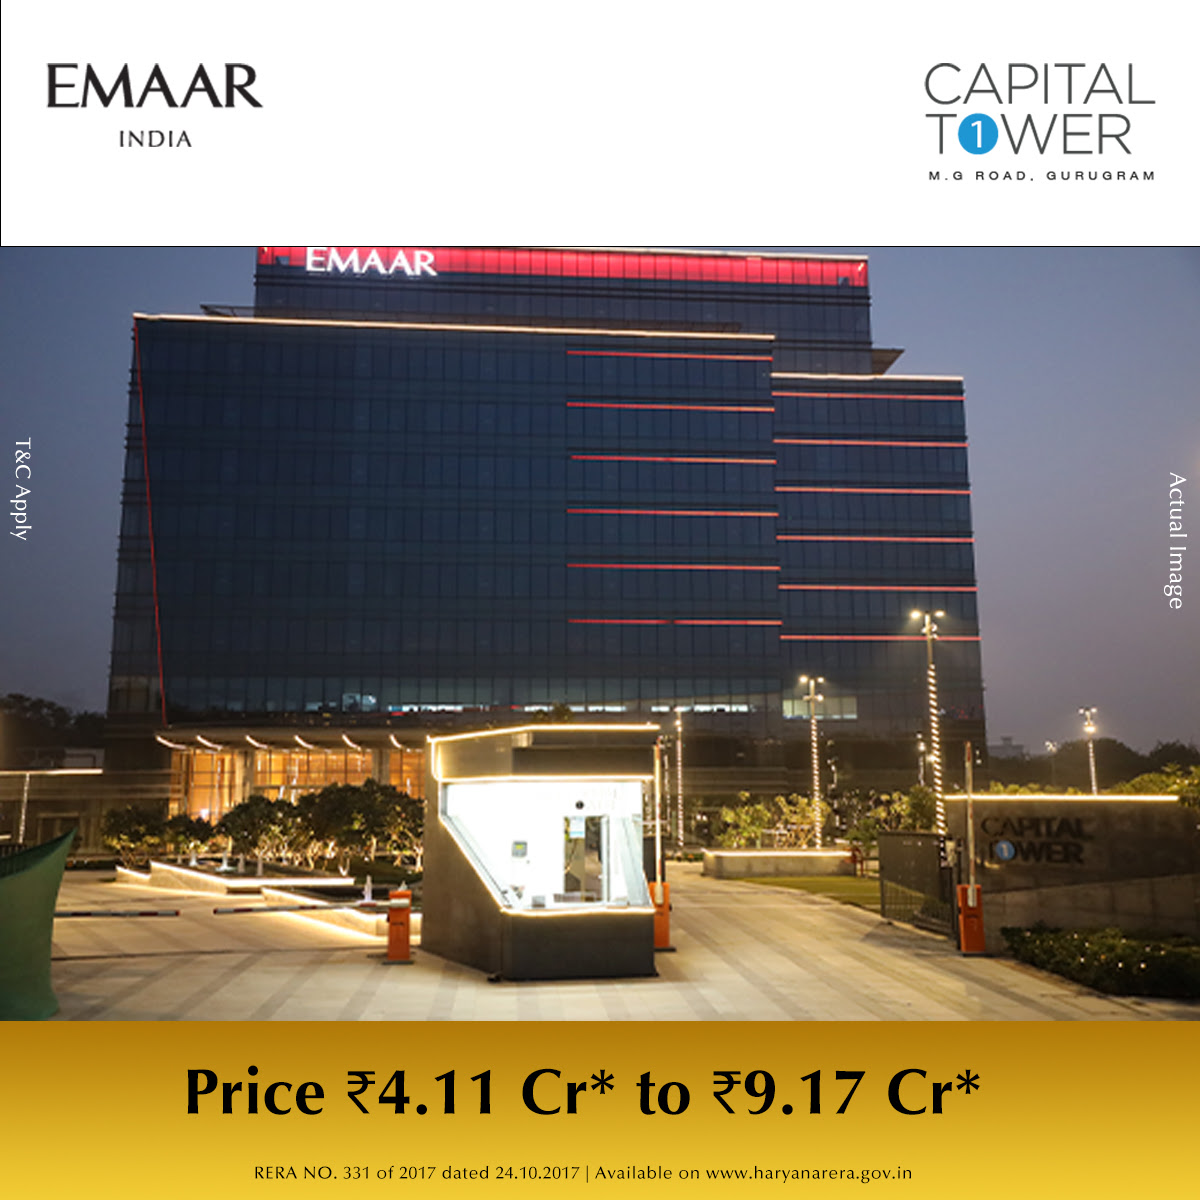 Highly flexible and customisable commercial spaces from 1175.21 to 2619.36 Sq.Ft. at Emaar Capital Towers, Gurgaon Update